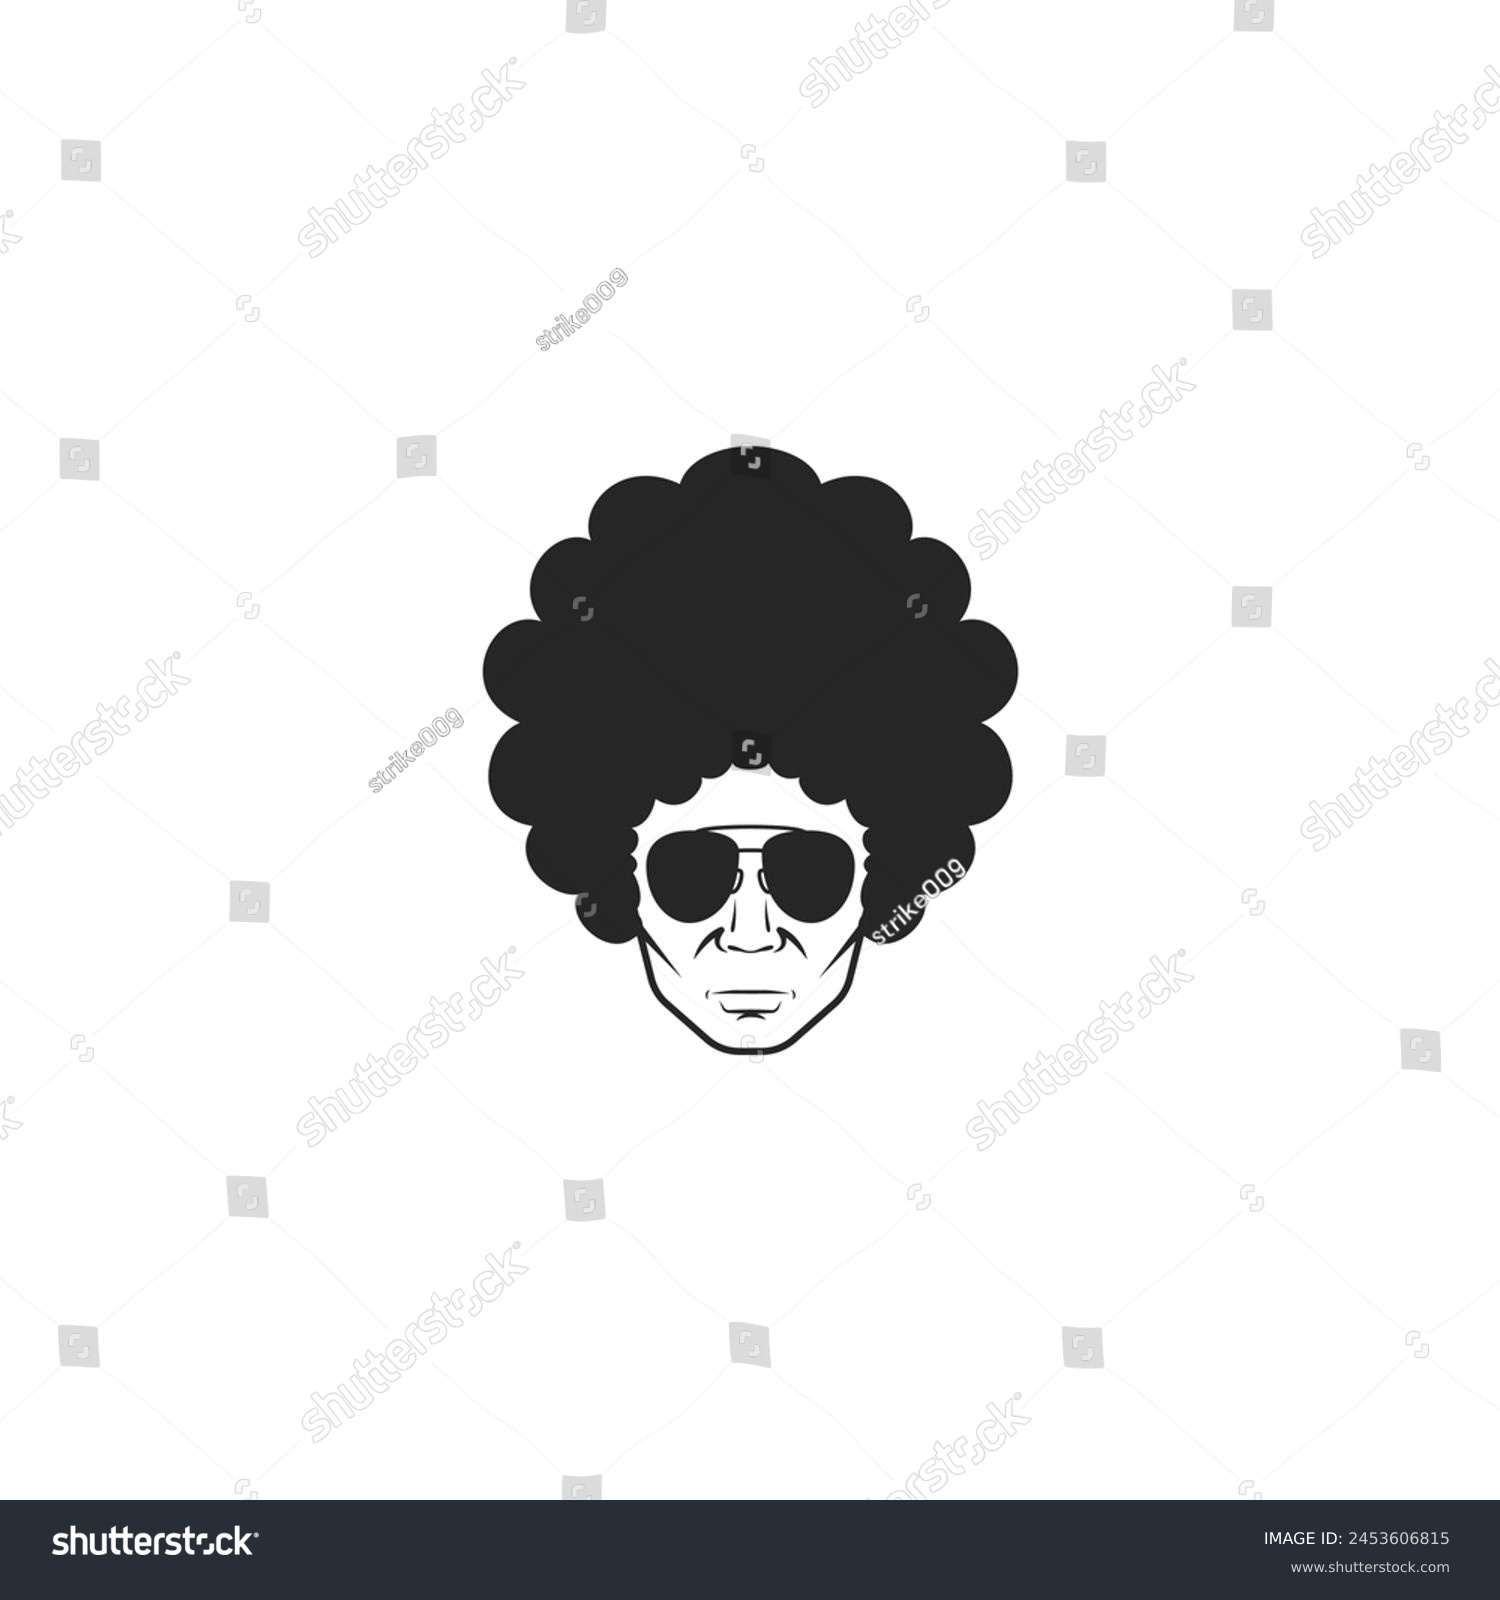 SVG of Afro Hair man with aviator glasses Logo Symbol Design Template Flat Style Vector svg